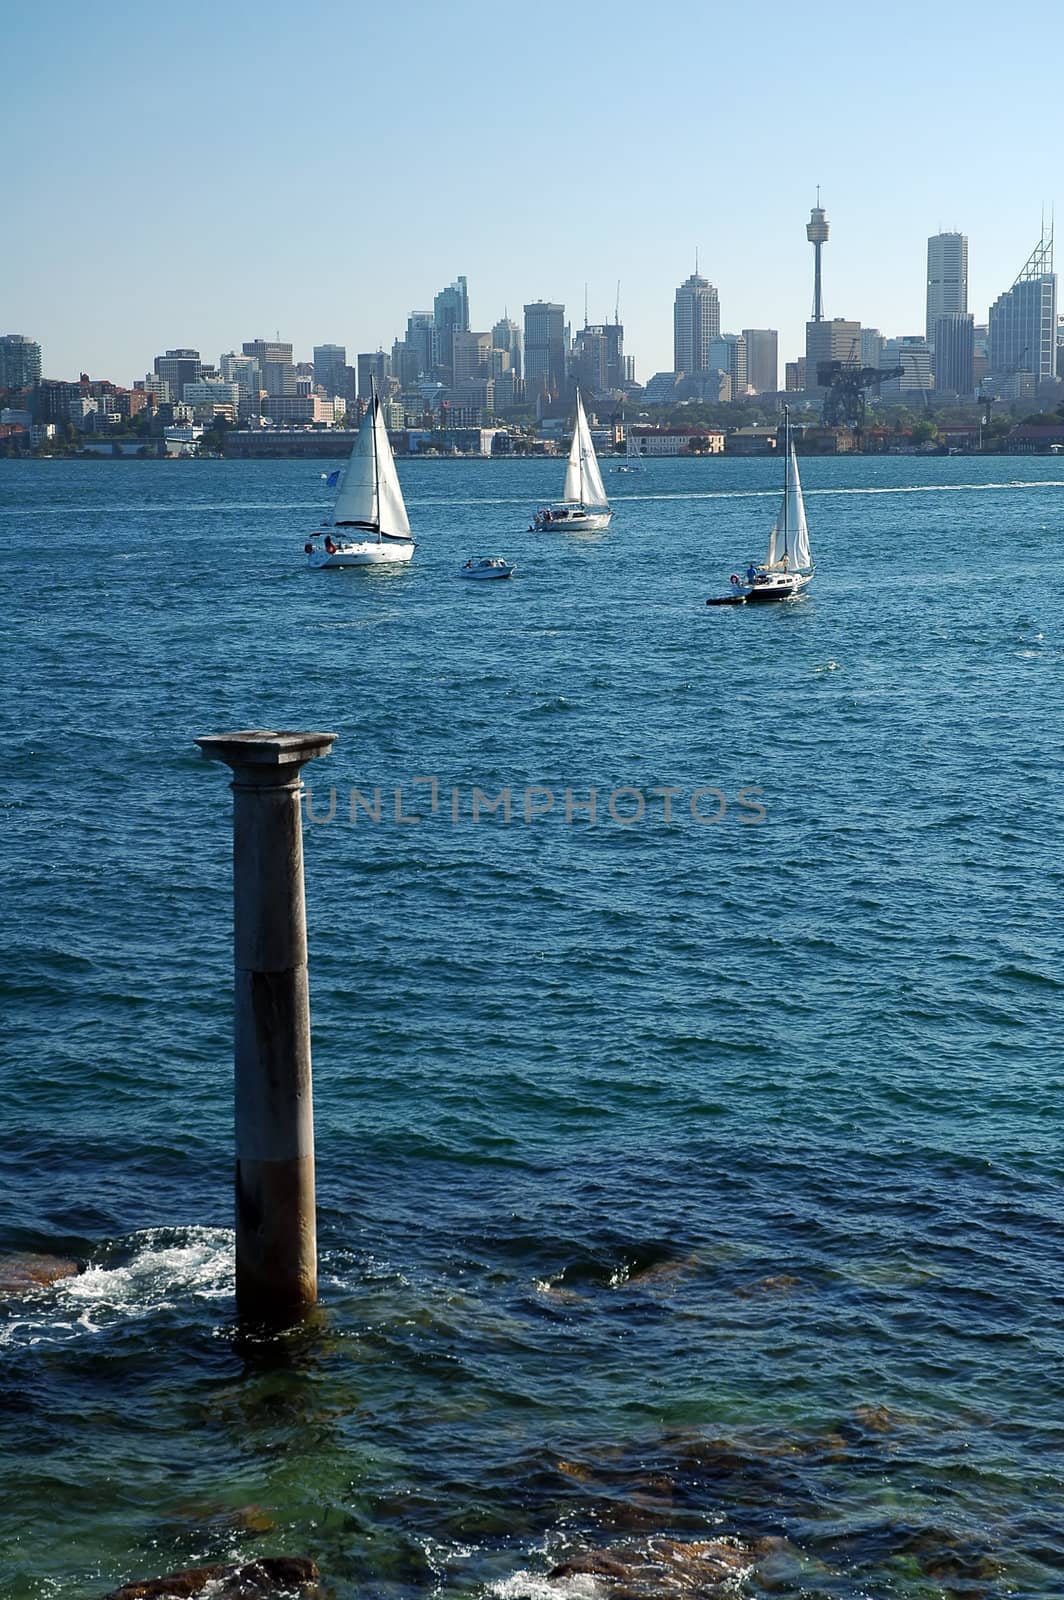 stone column in water, white yachts and sydney tower